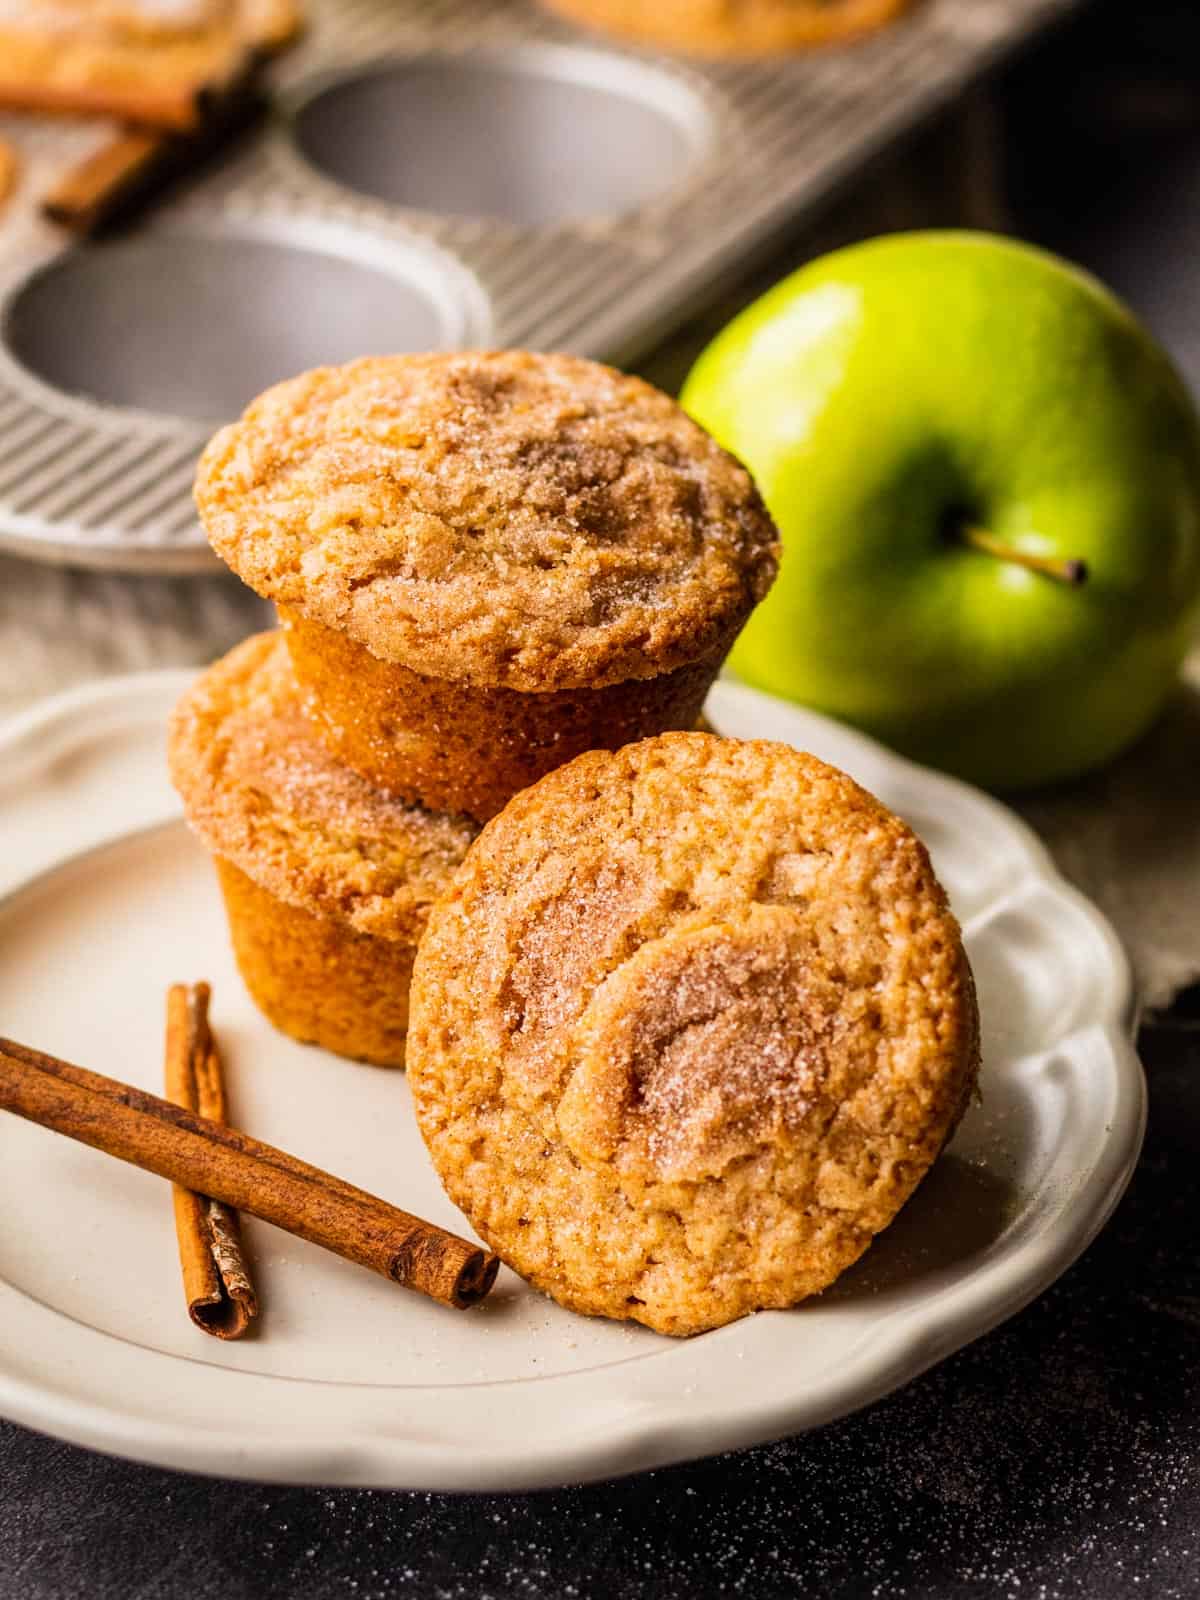 cinnamon sugar dusted muffins stacked on a plate next to two cinnamon sticks and green apple.